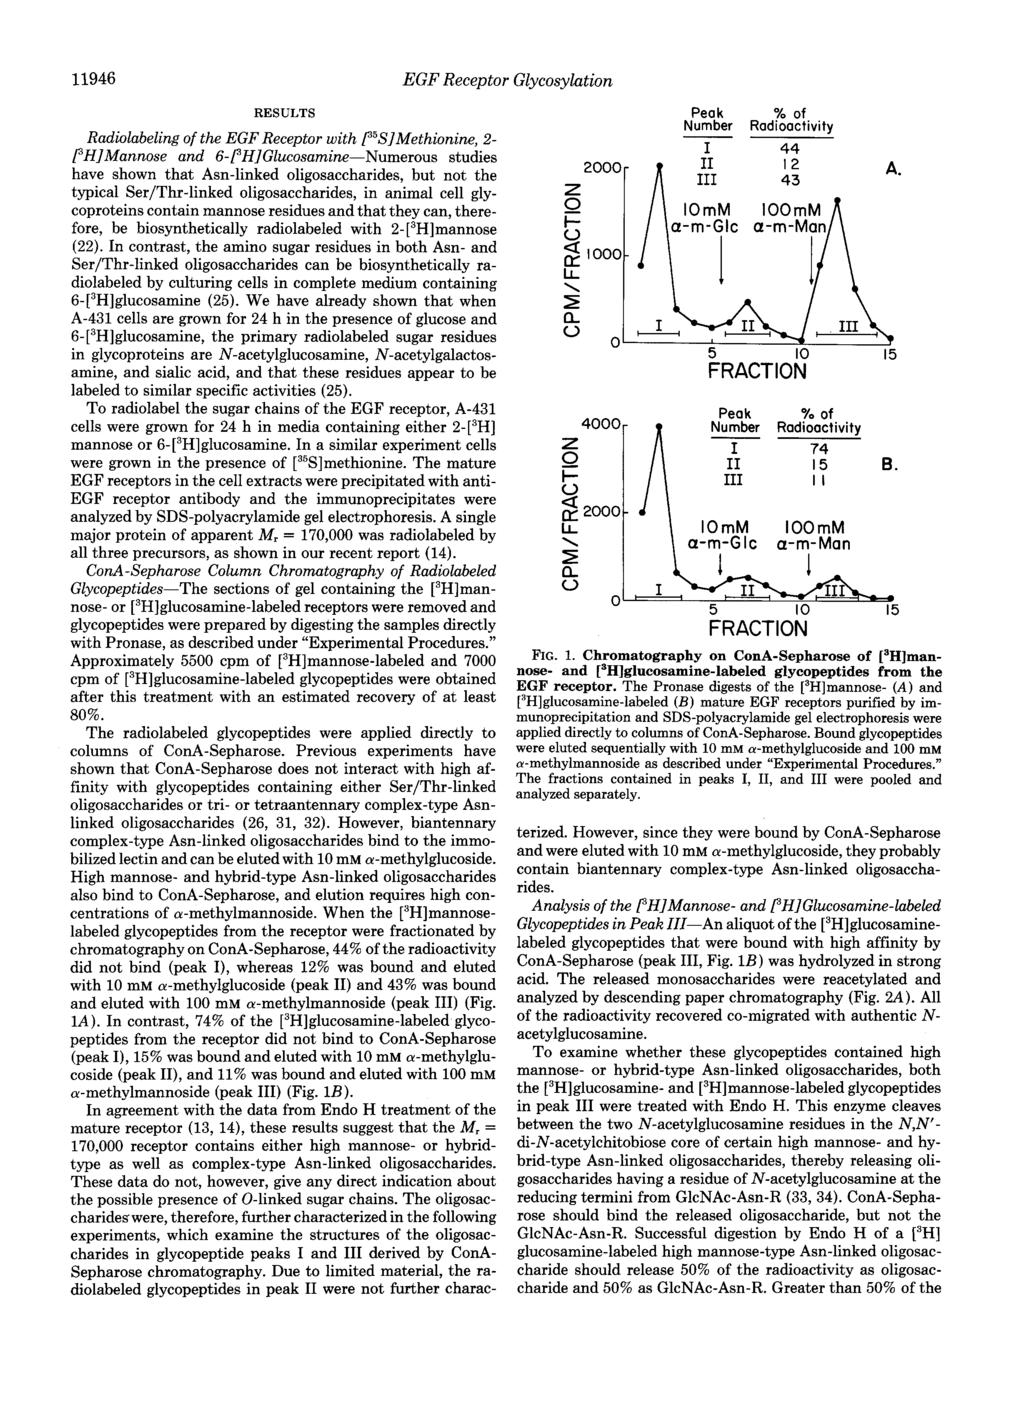 11946 Glycosylution EGF Receptor RESULTS Radiolabeling of the EGF Receptor with f5s]methionine, 2- PHIMannose and 6-fH]Glucosamine-Numerous studies have shown that Asn-linked oligosaccharides, but